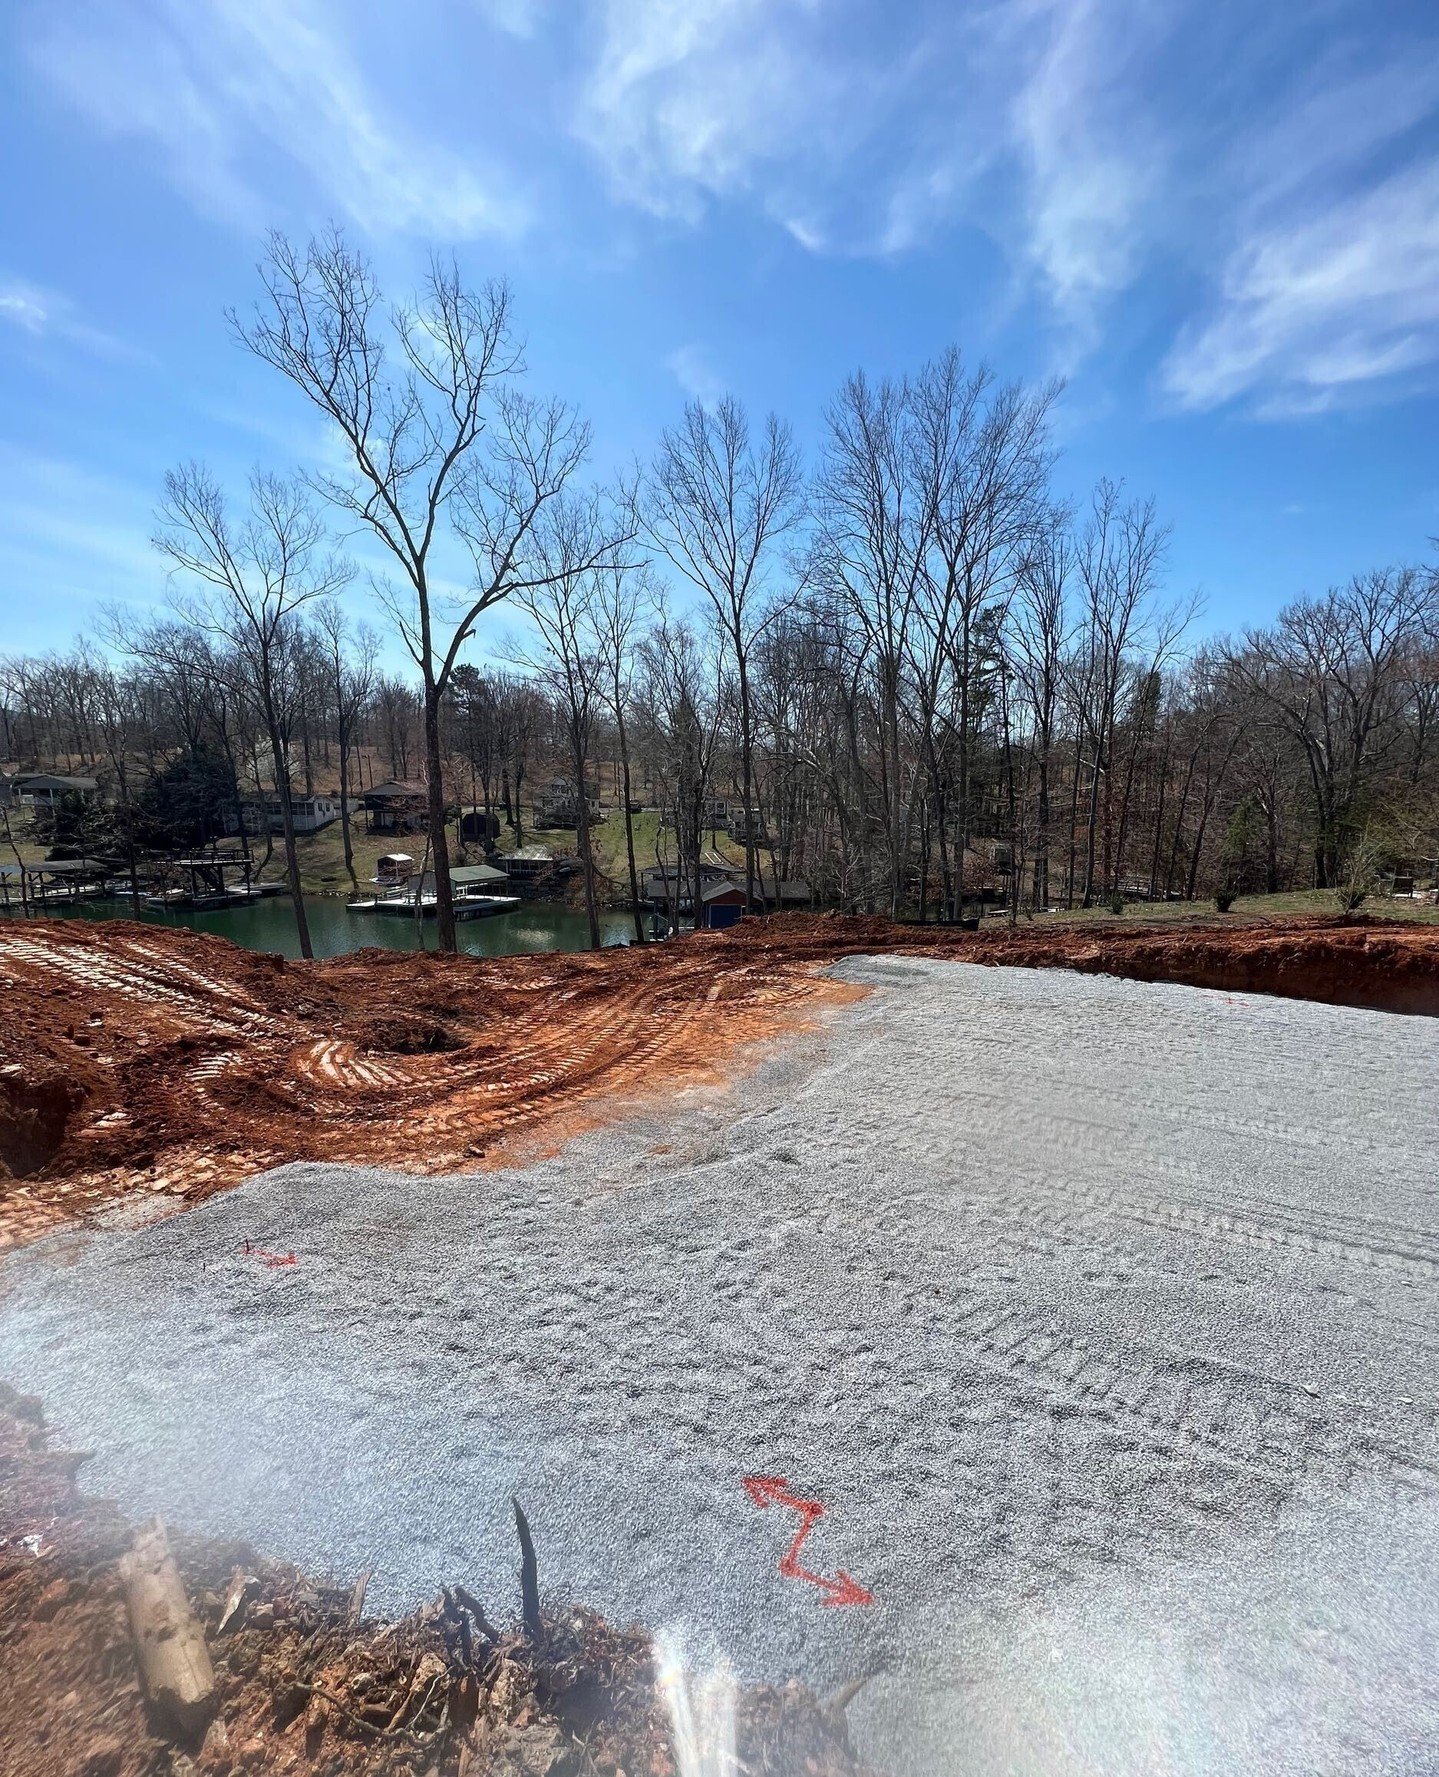 Progress update on our custom lake house at Smith Mountain Lake! 🏡 ⁠
⁠
The basement is all set for the slab, and the garage foundation has been poured. Don&rsquo;t miss the rendering of what&rsquo;s to come - swipe right to see the future of lakesid